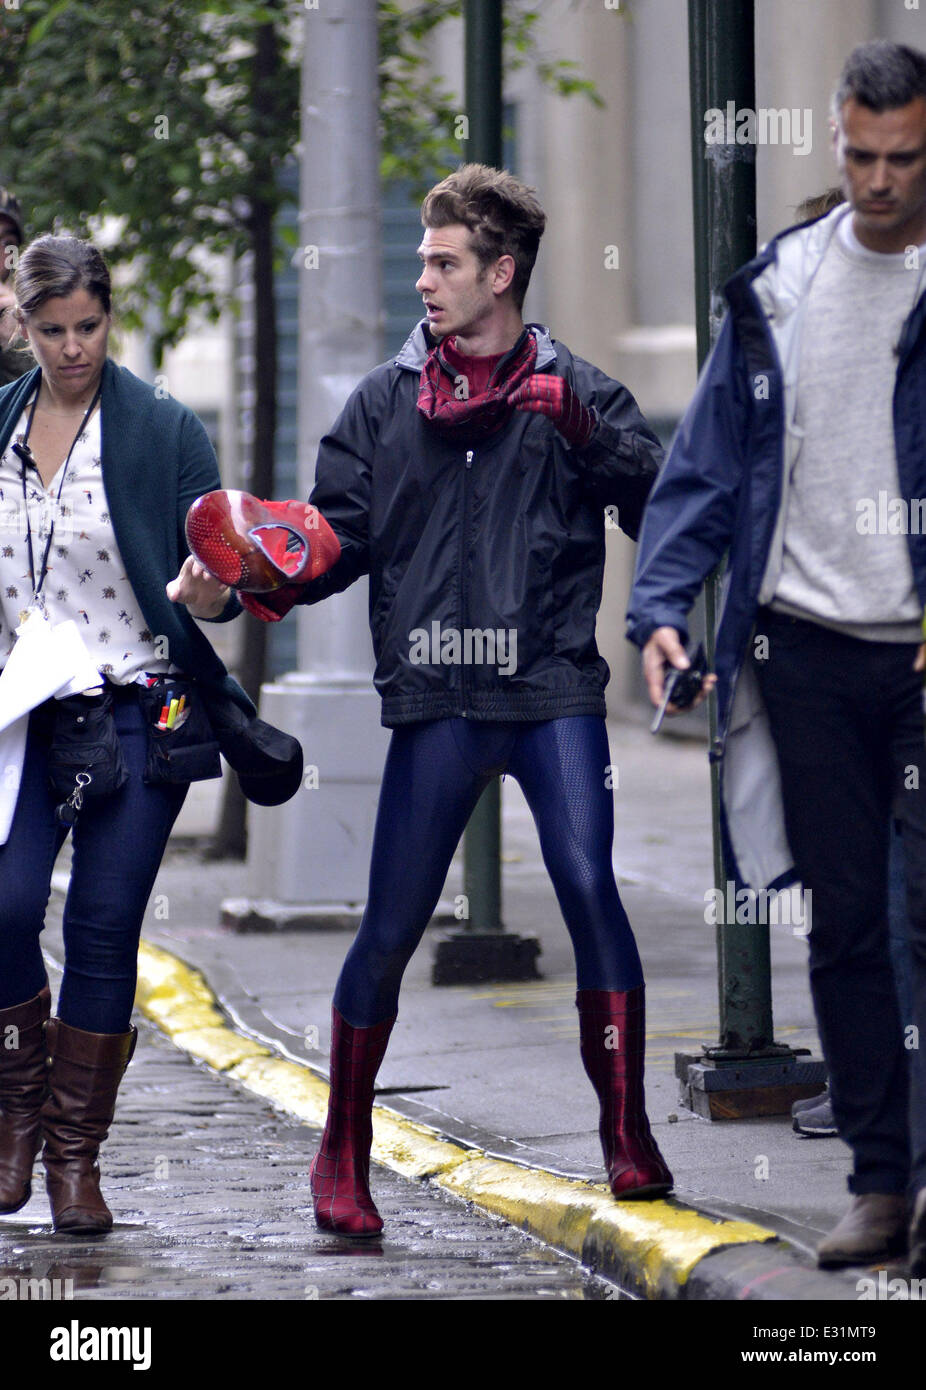 Andrew Garfield and Paul Giamatti filming an action scene on the set of  'The Amazing Spider-Man 2' in Brooklyn. Garfield is spotted wearing his Spider-Man  costume during shooting Featuring: Andrew Garfield Where: